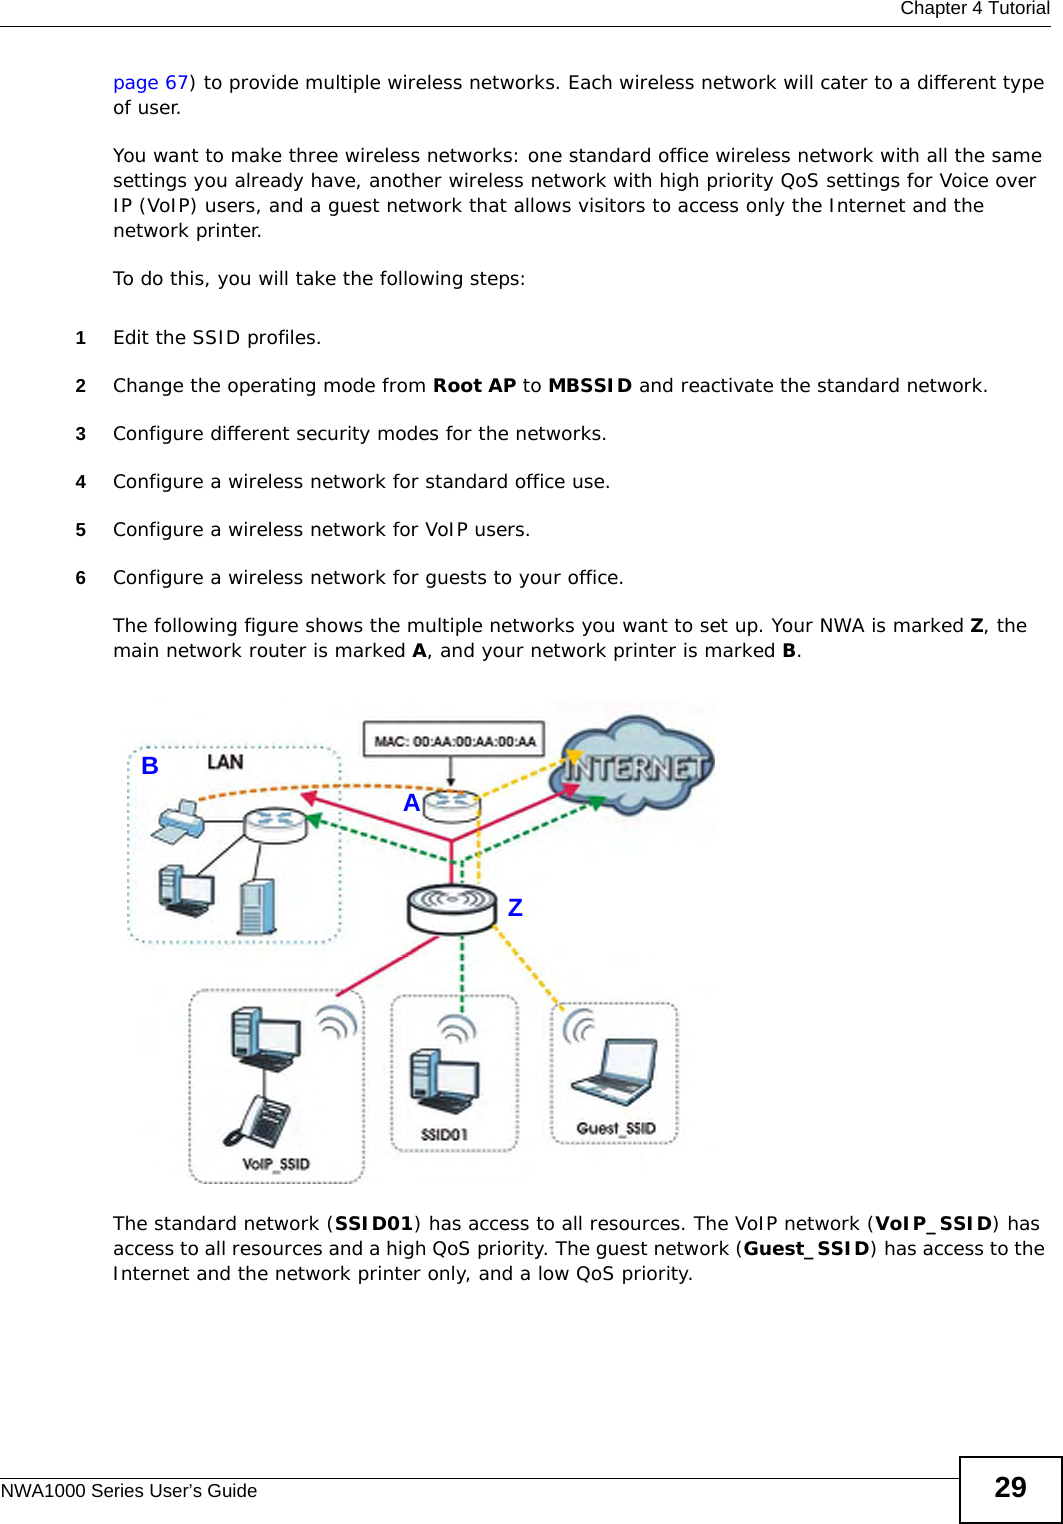  Chapter 4 TutorialNWA1000 Series User’s Guide 29page 67) to provide multiple wireless networks. Each wireless network will cater to a different type of user.You want to make three wireless networks: one standard office wireless network with all the same settings you already have, another wireless network with high priority QoS settings for Voice over IP (VoIP) users, and a guest network that allows visitors to access only the Internet and the network printer.To do this, you will take the following steps:1Edit the SSID profiles.2Change the operating mode from Root AP to MBSSID and reactivate the standard network.3Configure different security modes for the networks.4Configure a wireless network for standard office use.5Configure a wireless network for VoIP users.6Configure a wireless network for guests to your office.The following figure shows the multiple networks you want to set up. Your NWA is marked Z, the main network router is marked A, and your network printer is marked B.The standard network (SSID01) has access to all resources. The VoIP network (VoIP_SSID) has access to all resources and a high QoS priority. The guest network (Guest_SSID) has access to the Internet and the network printer only, and a low QoS priority.ZAB